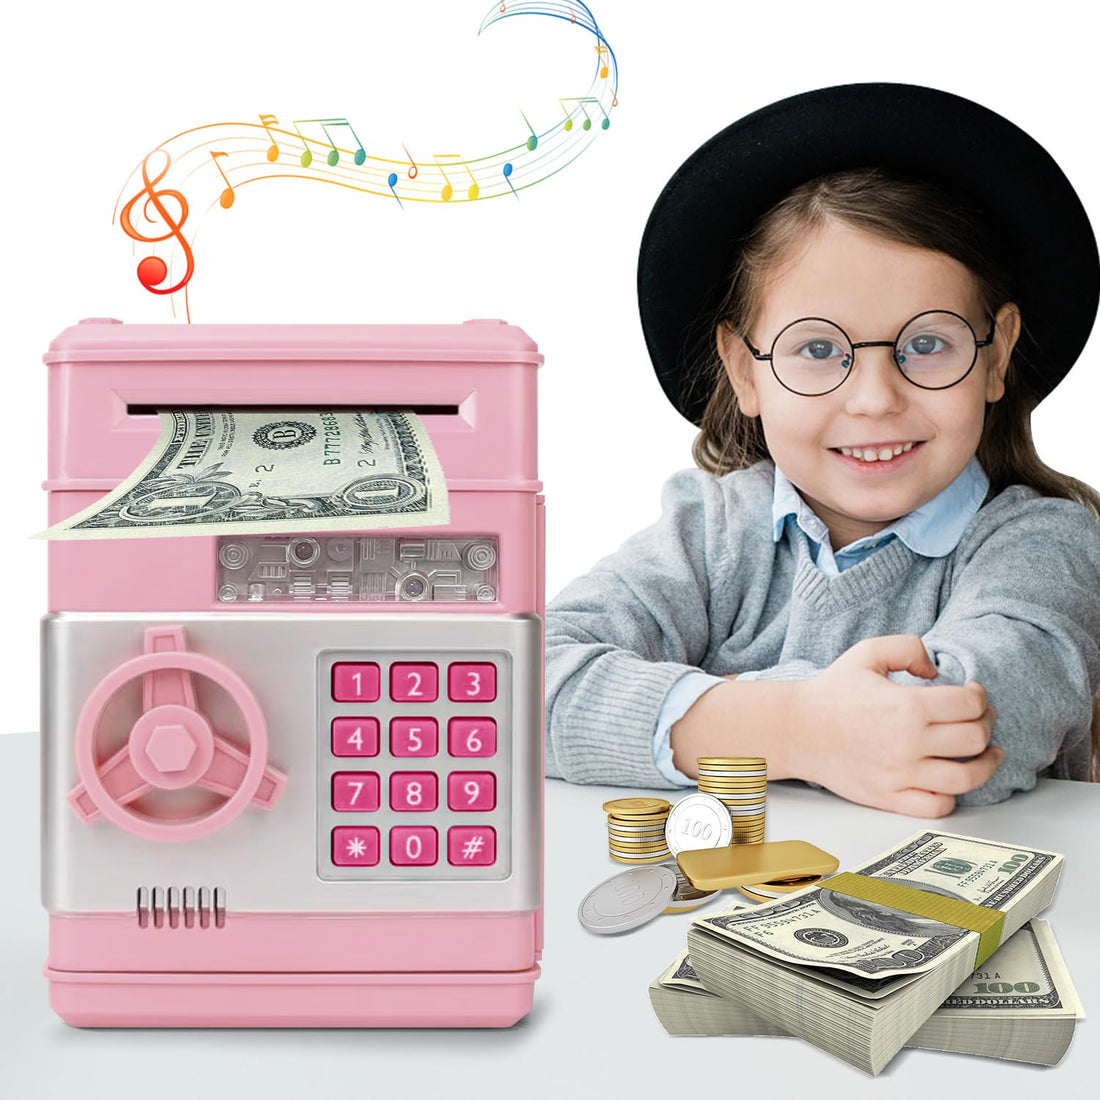 SZJMAO Piggy Bank Cash Coin Bank ATM Bank Money Saving Box with Password for Kids Birthday Gifts (Light Pink)